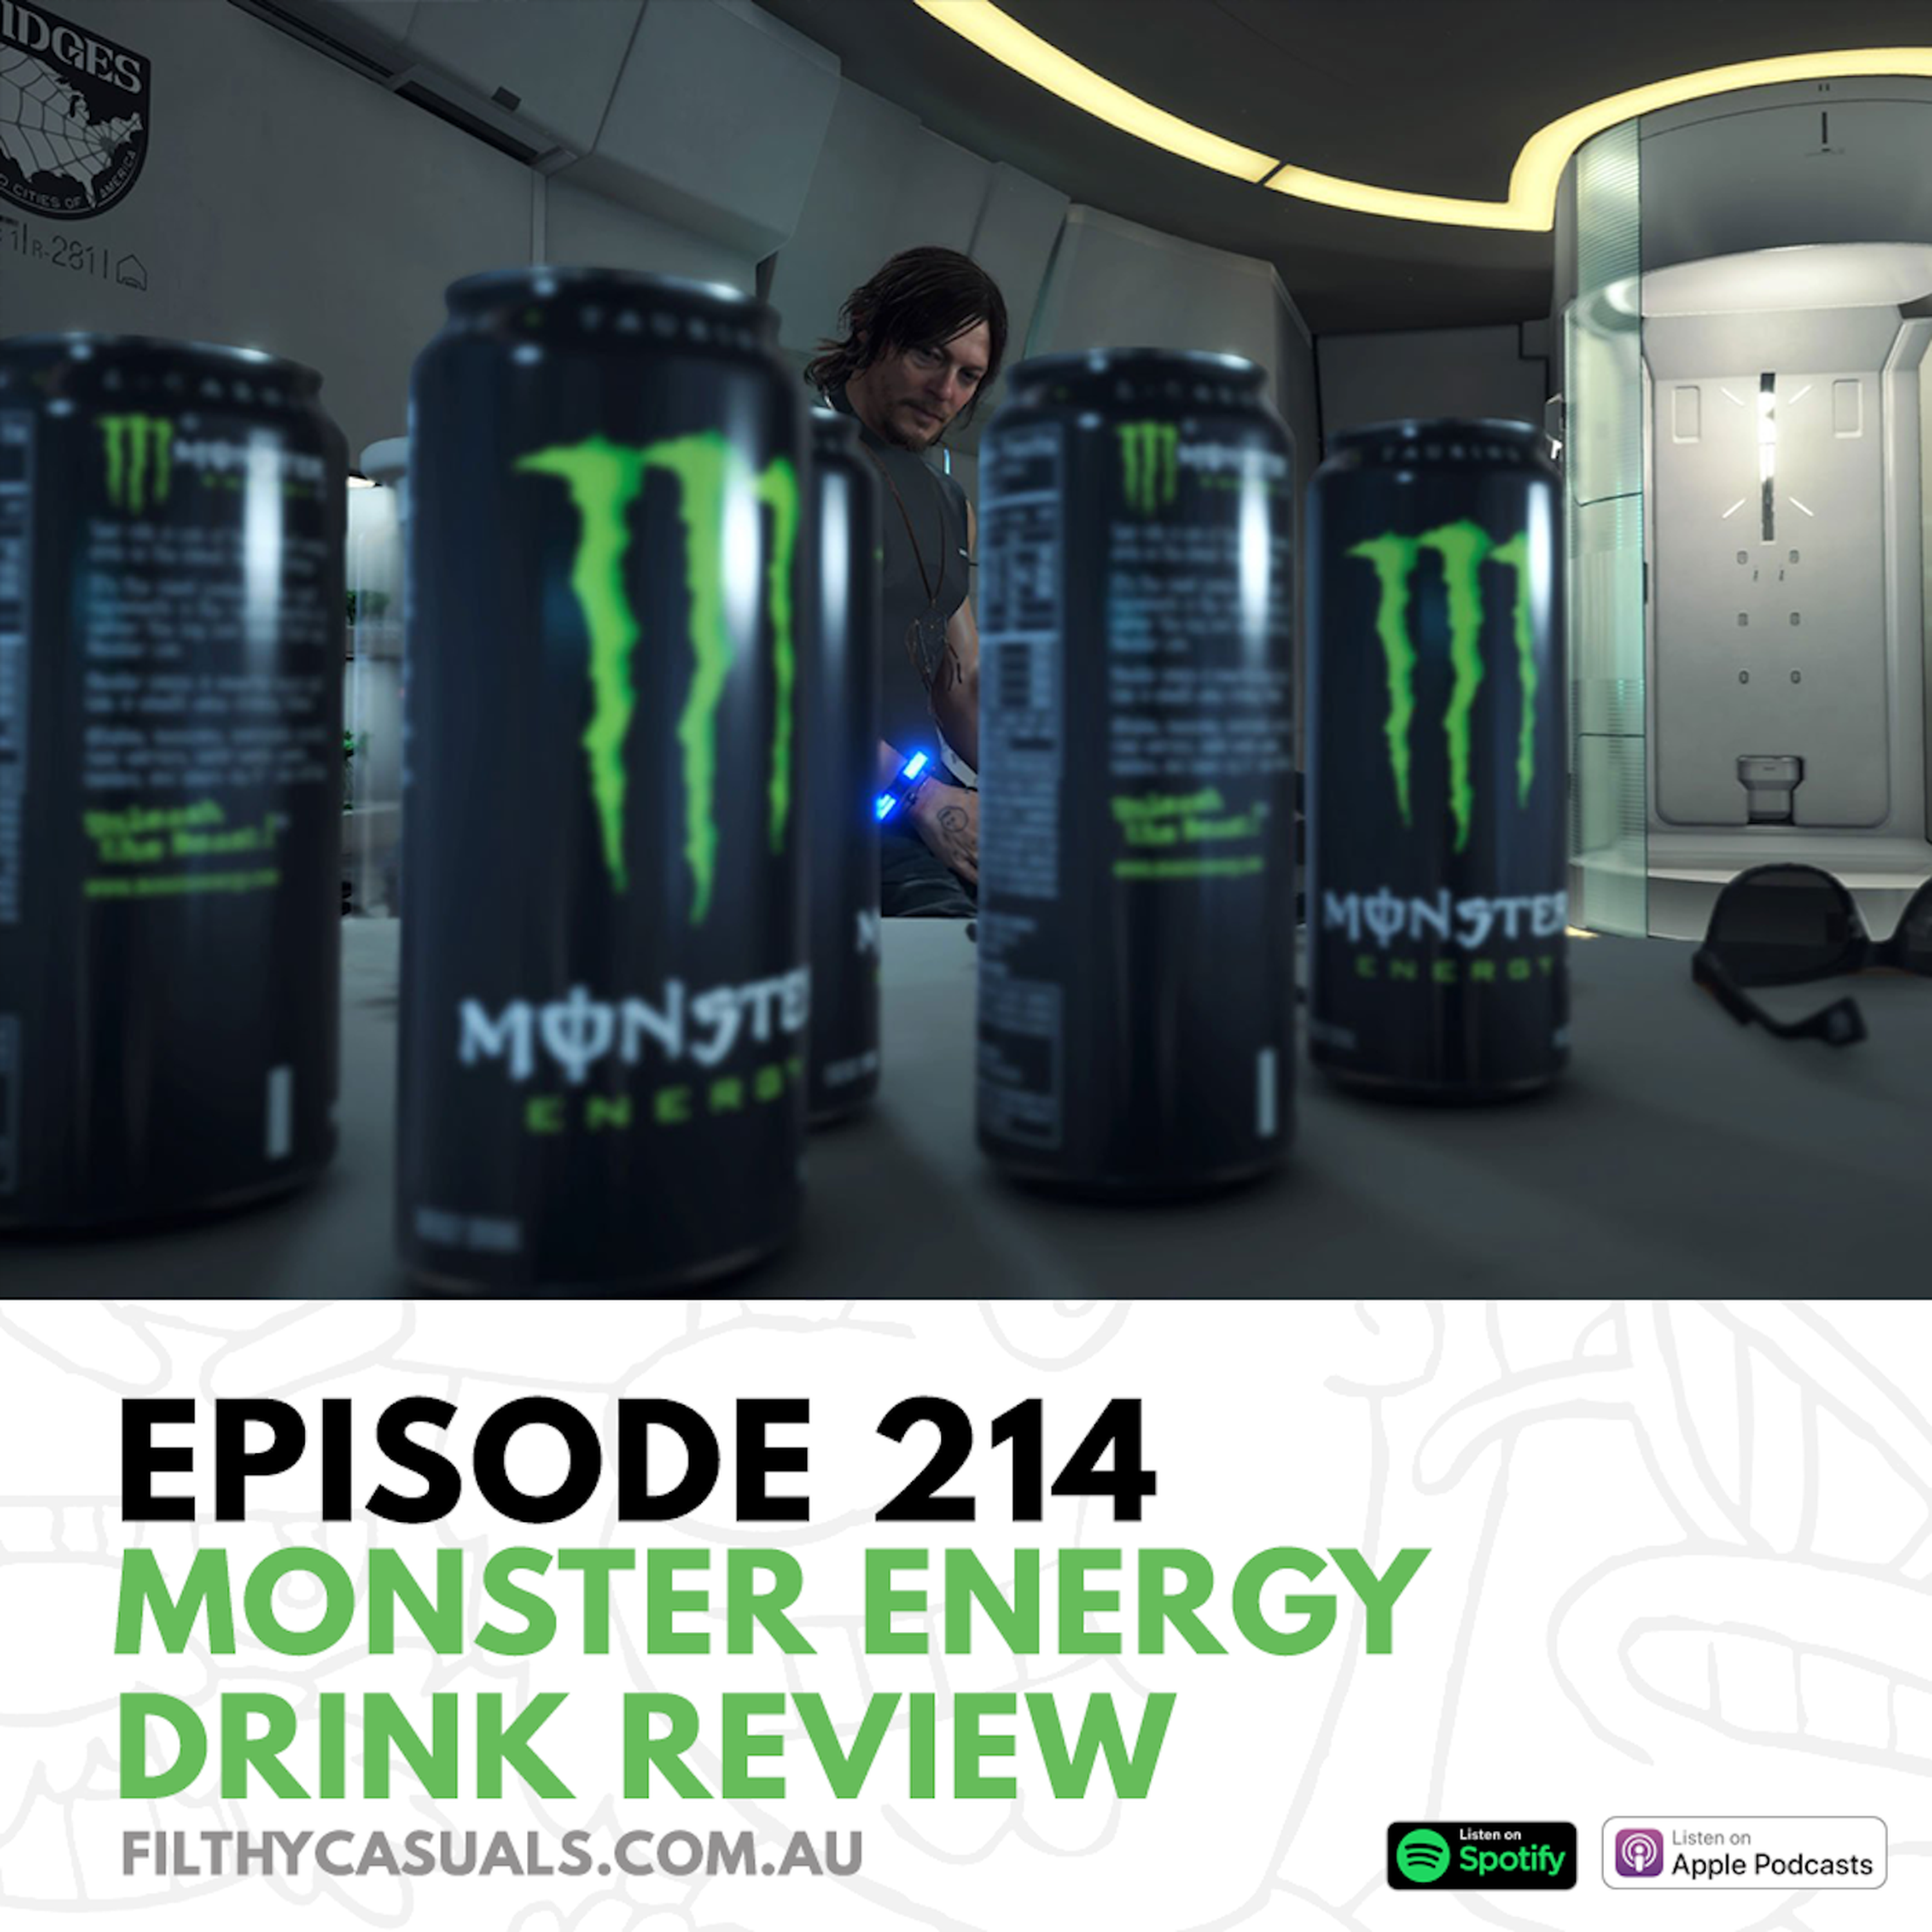 Episode 214: Monster Energy Drink Review